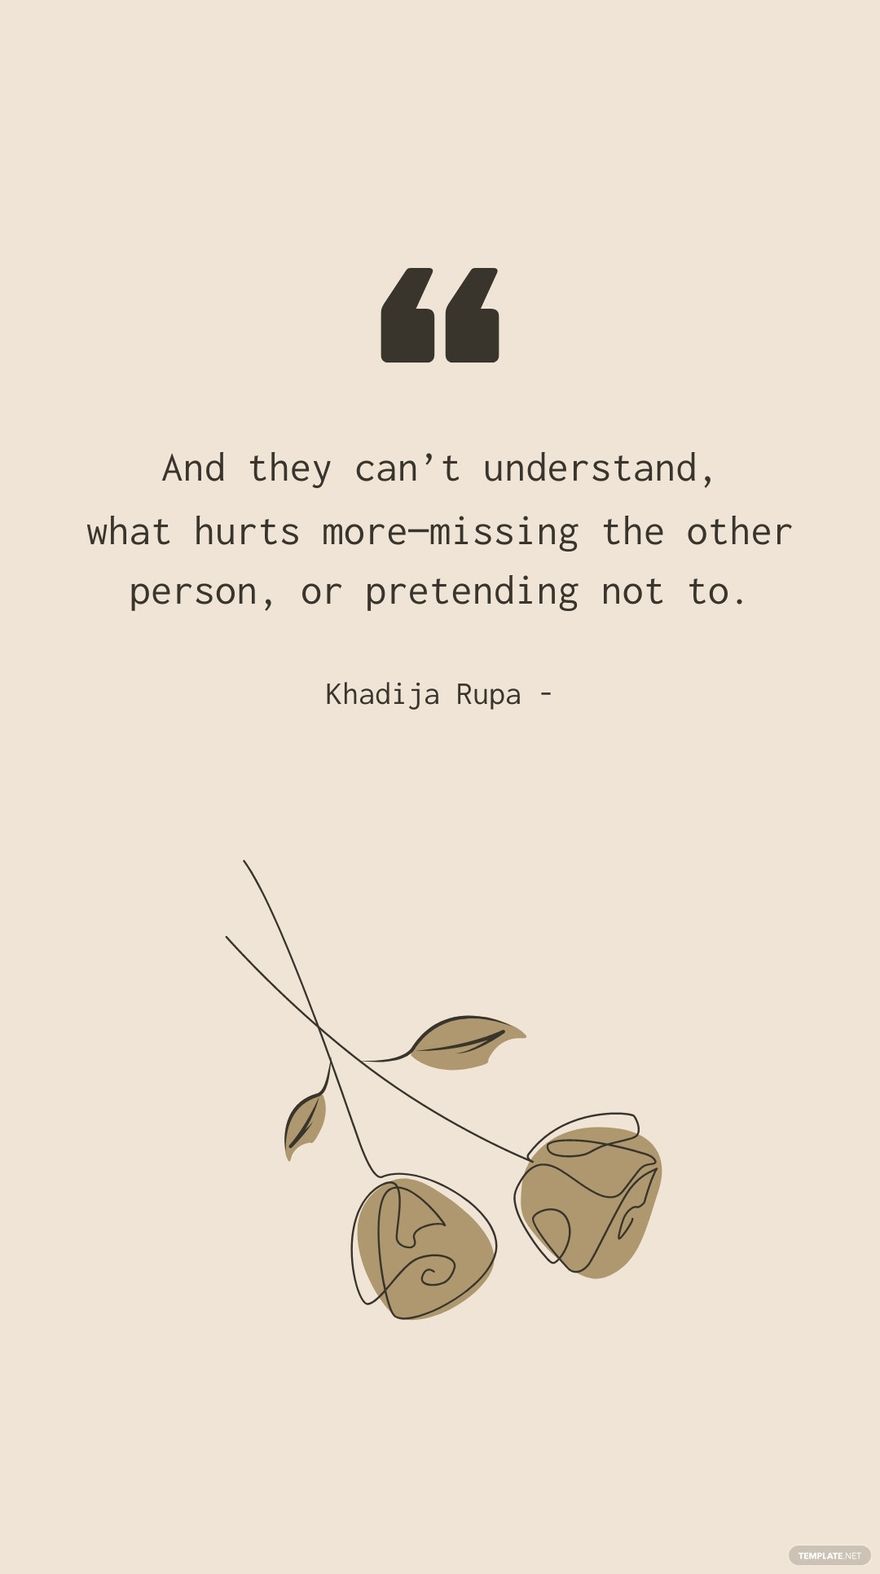 Khadija Rupa - And they can’t understand, what hurts more—missing the other person, or pretending not to.